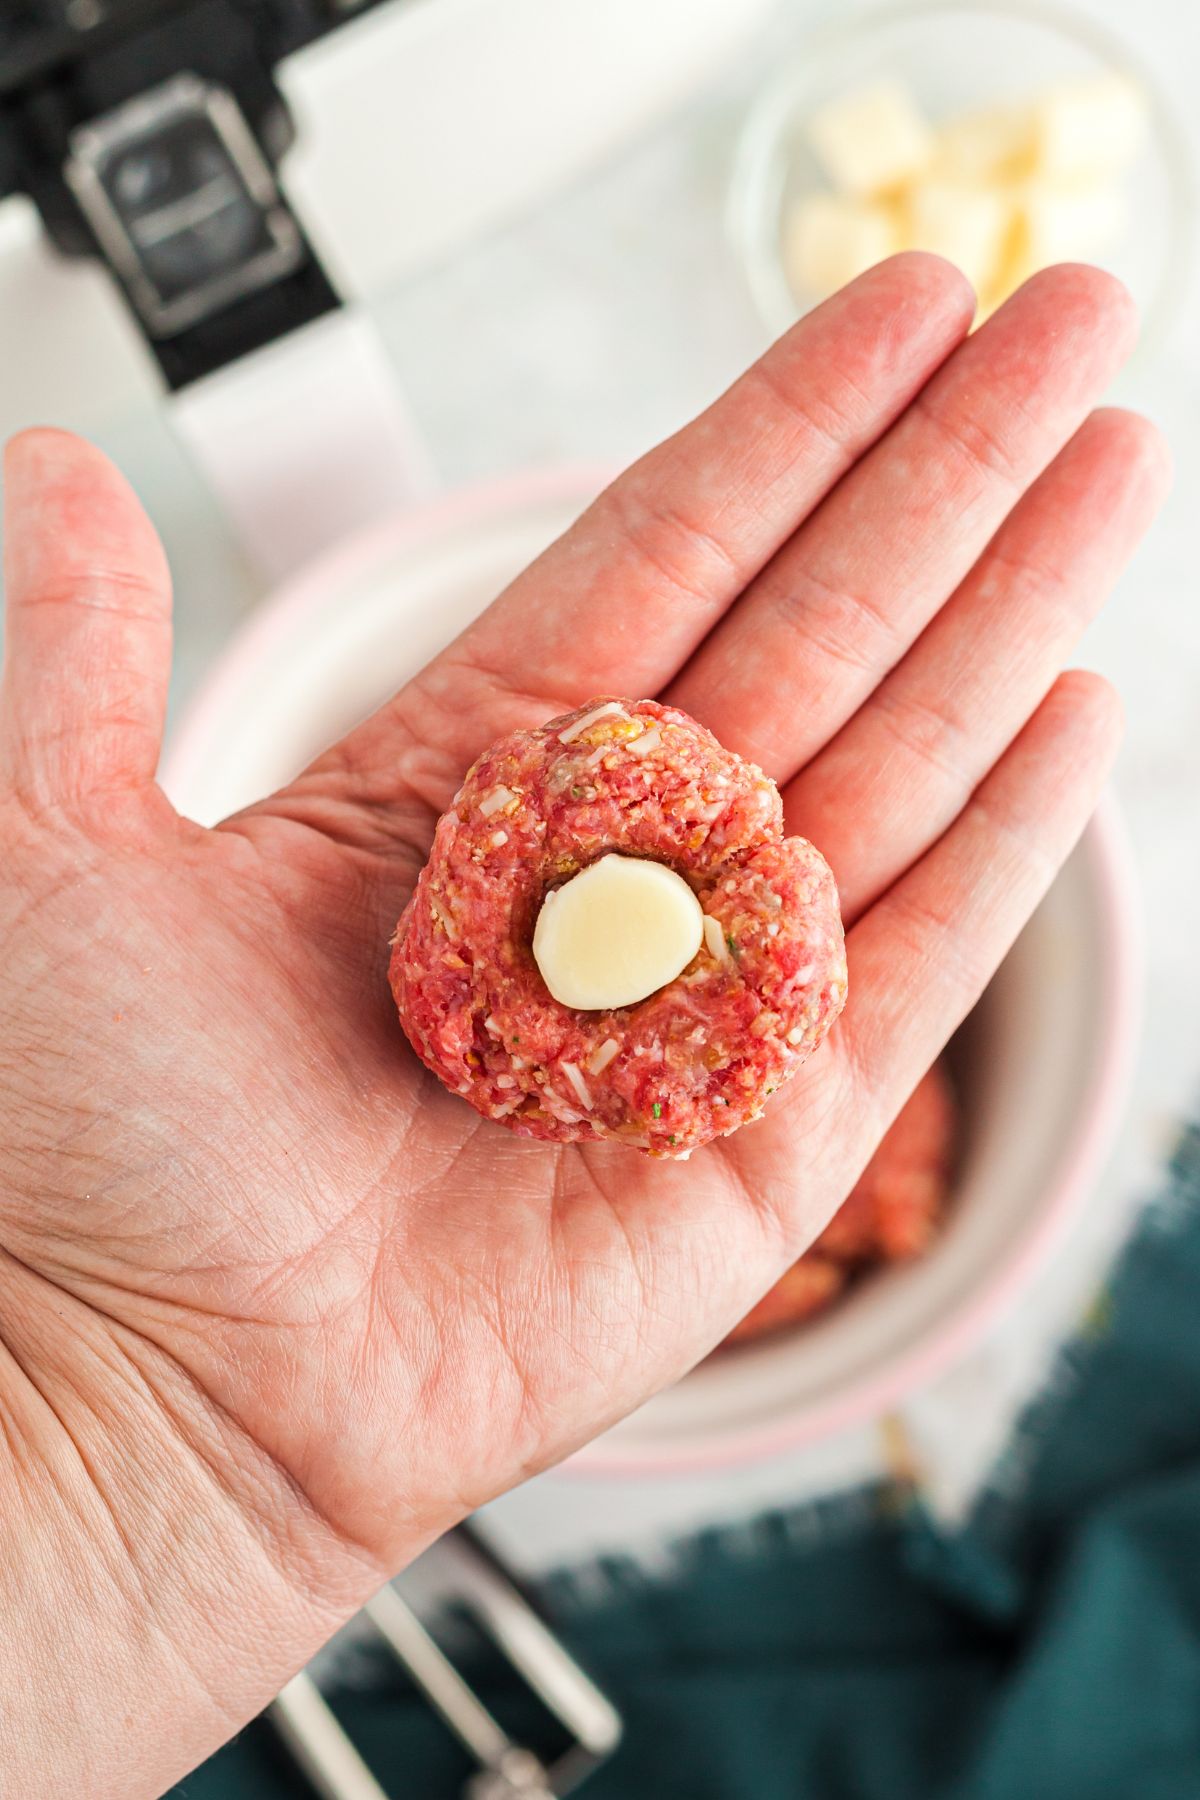 Raw meatball in a hand with a piece of cheese being stuffed into the meat.